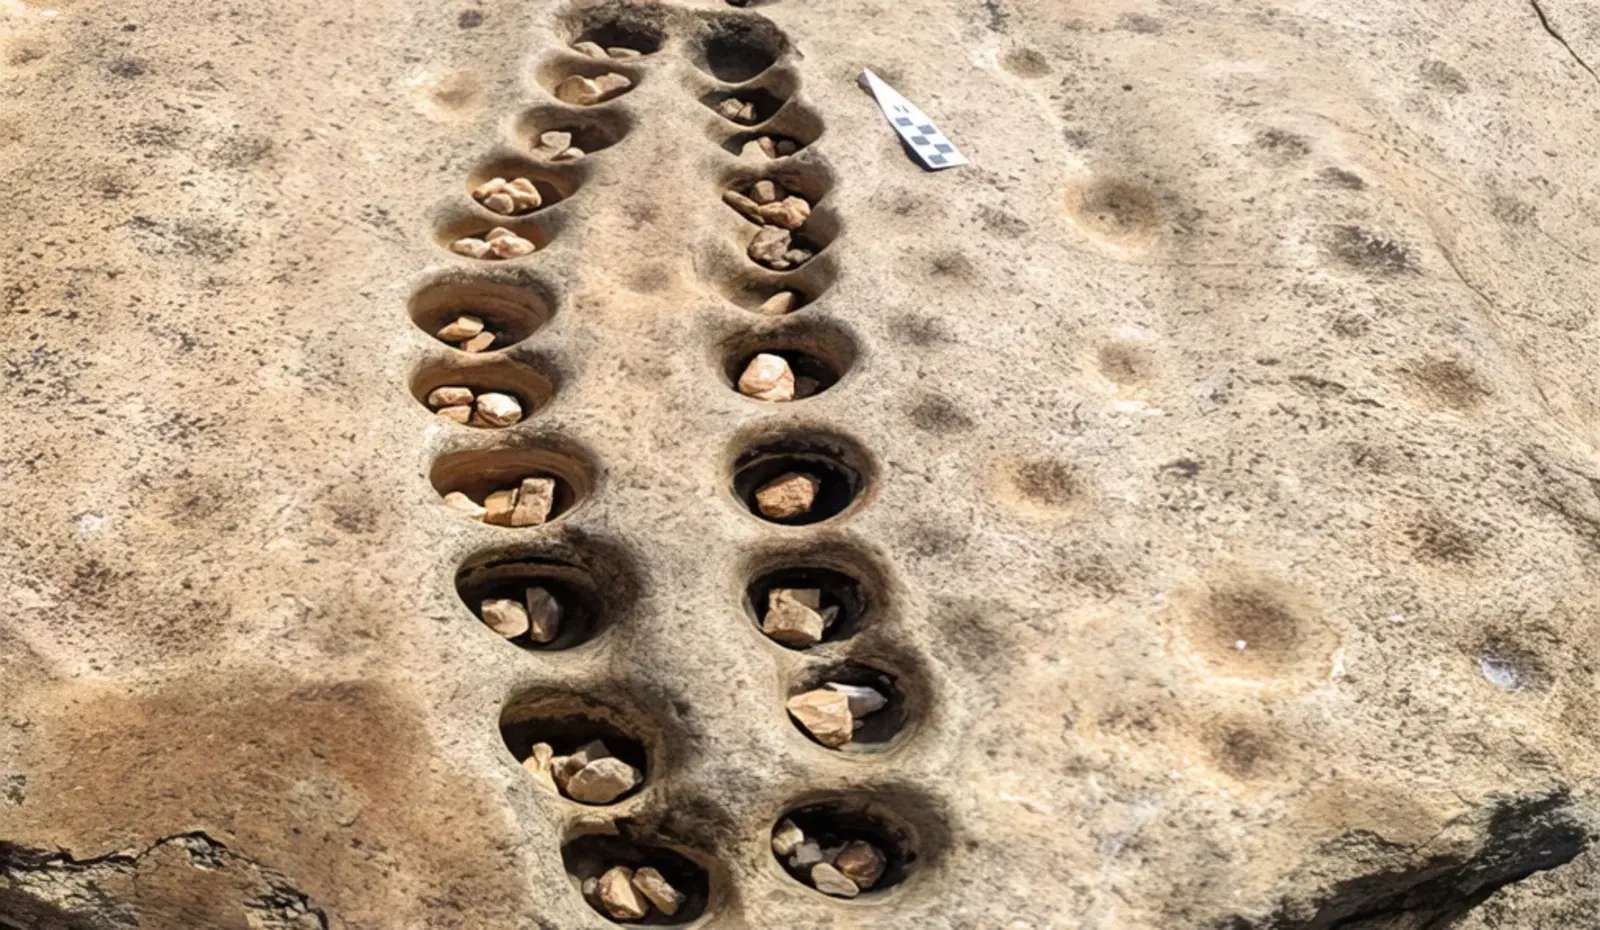 A centuries-old board game discovered in rocks in Africa